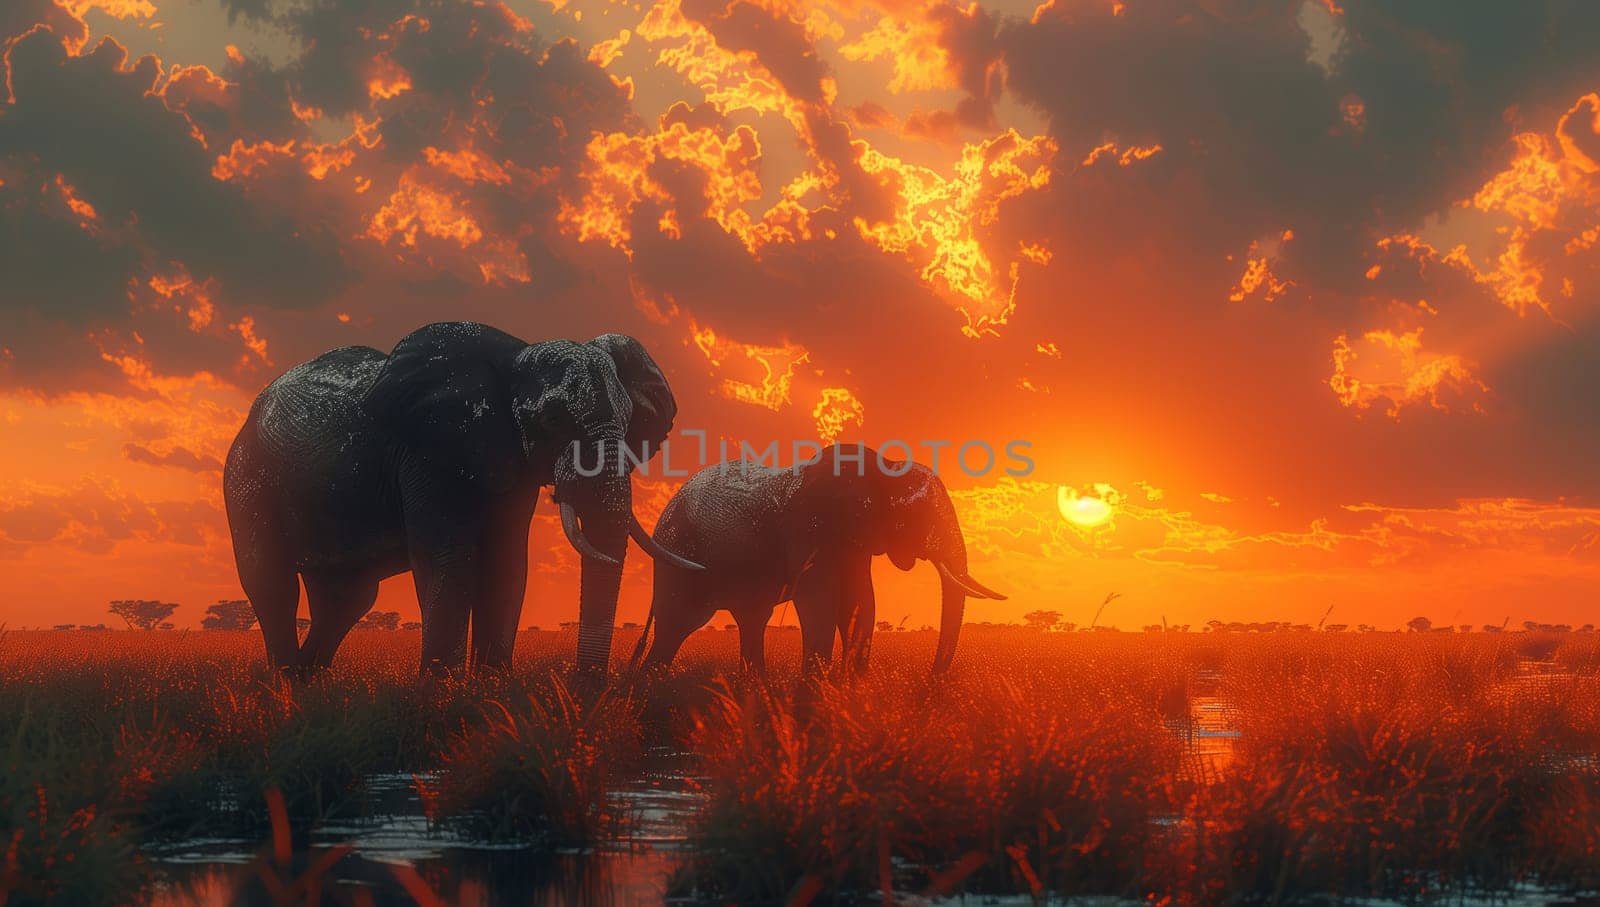 Elephants gather in a grassy plain under the sunset sky by richwolf